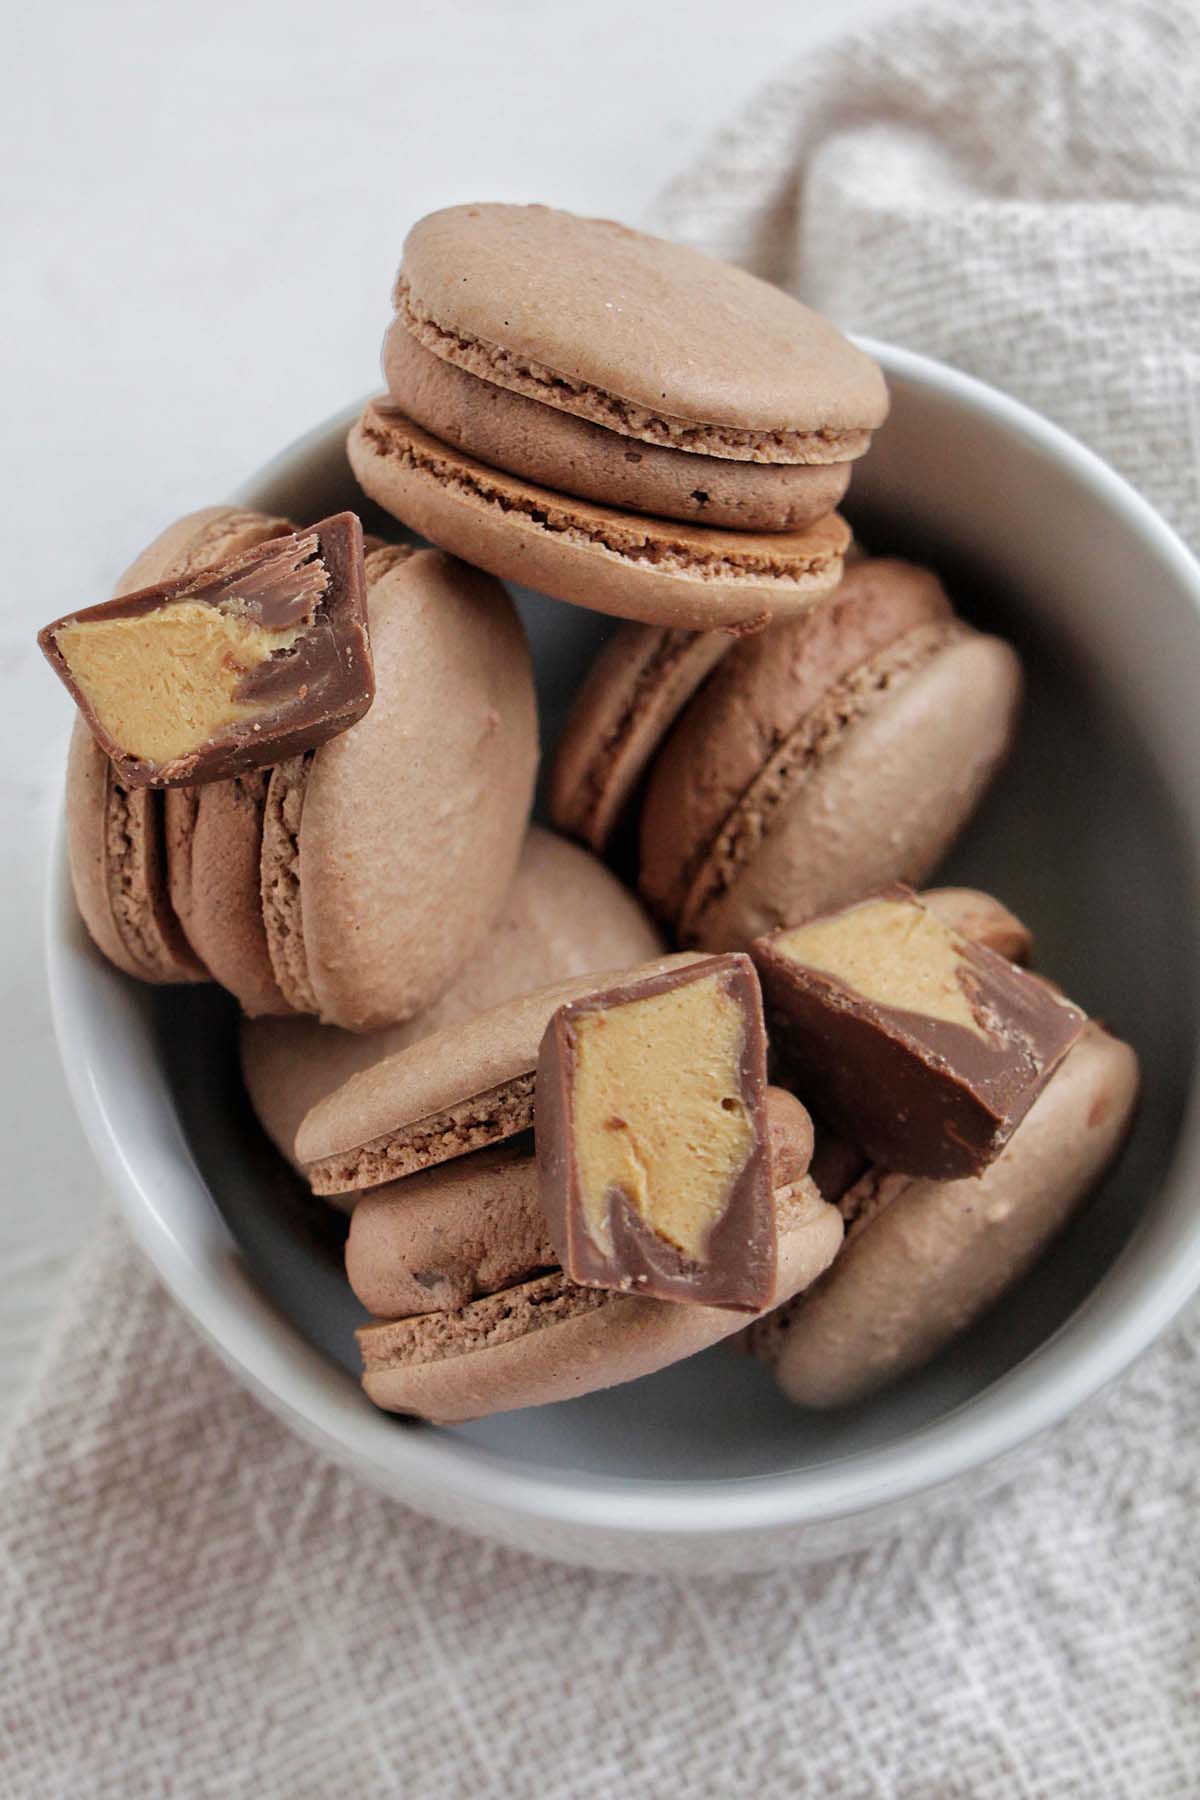 Reese's peanut butter macarons.